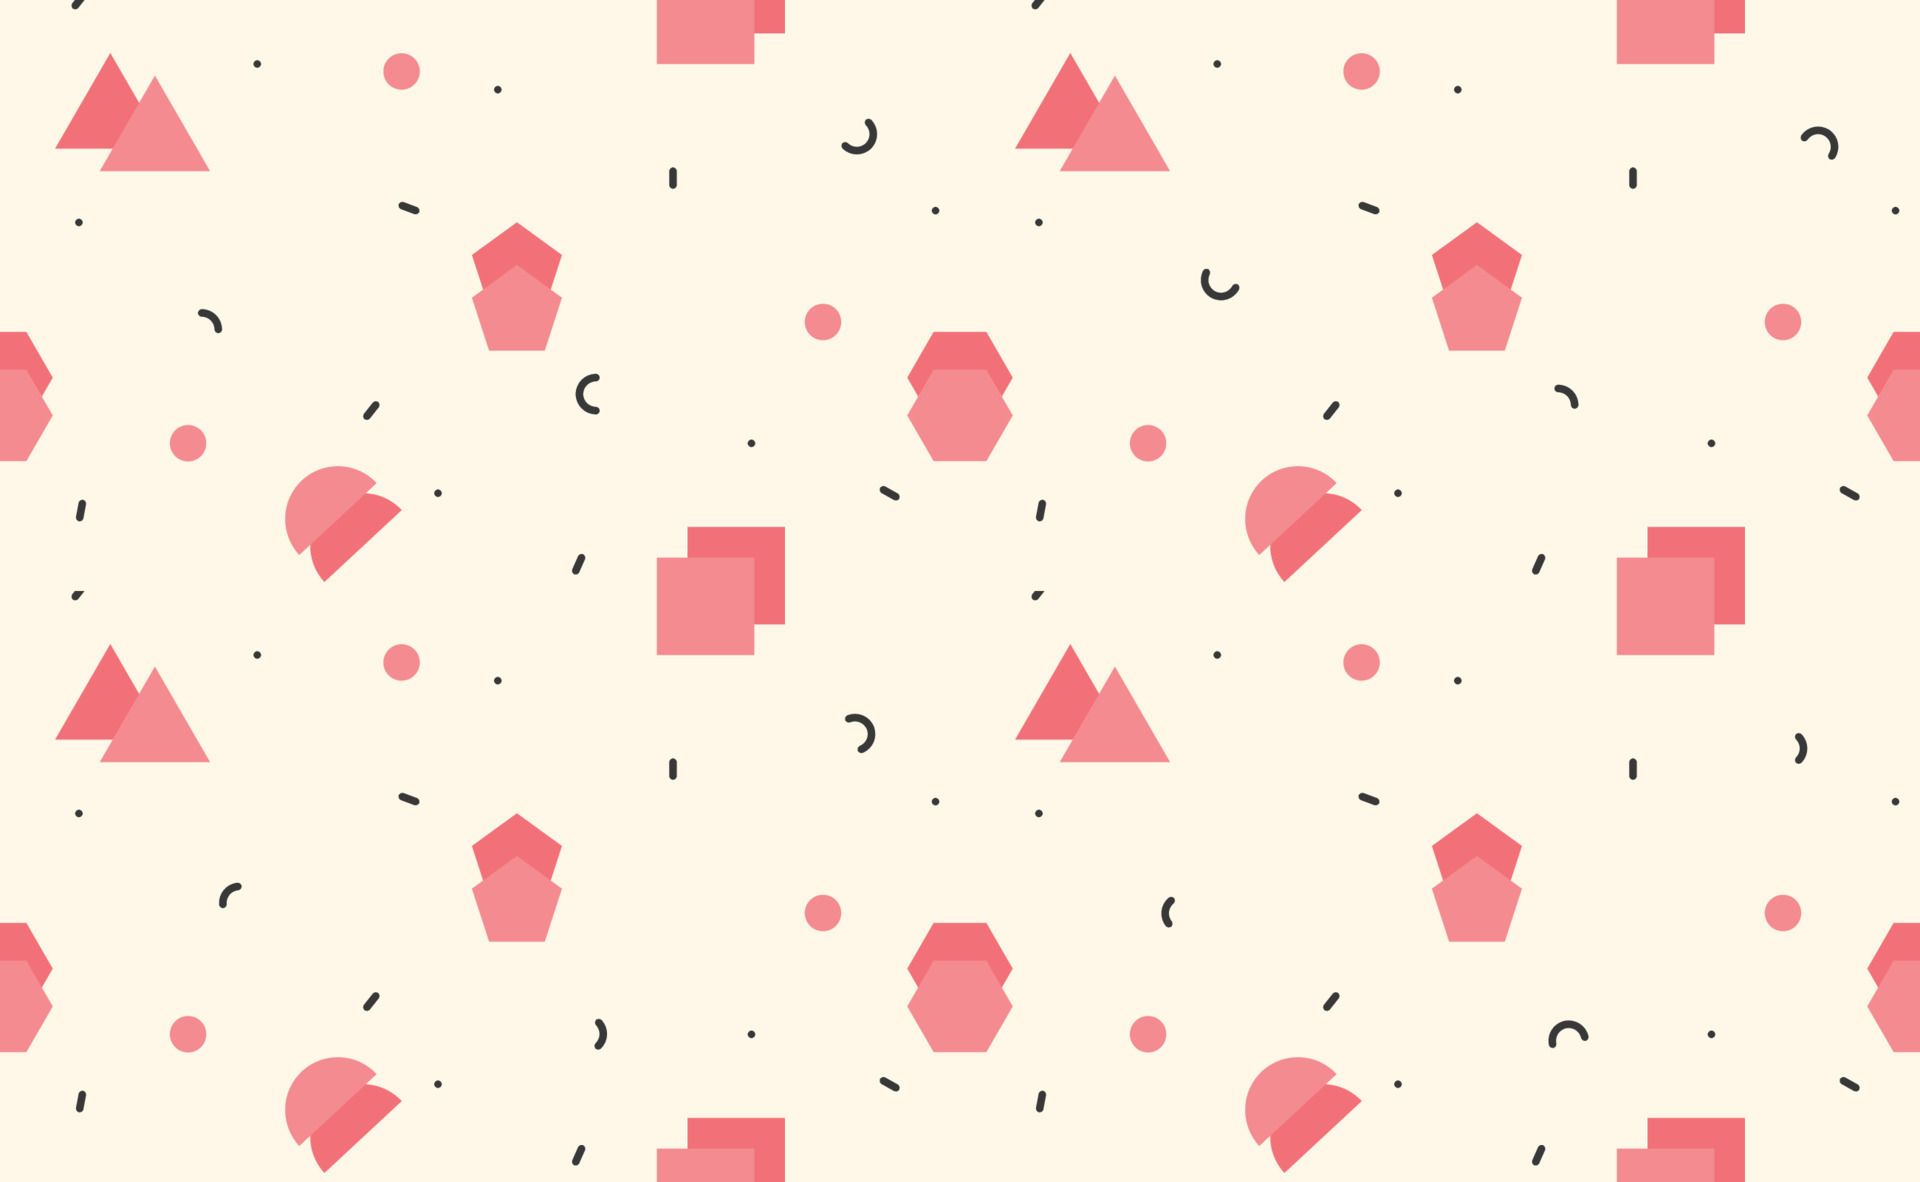 A pattern with pink and white dots - Math